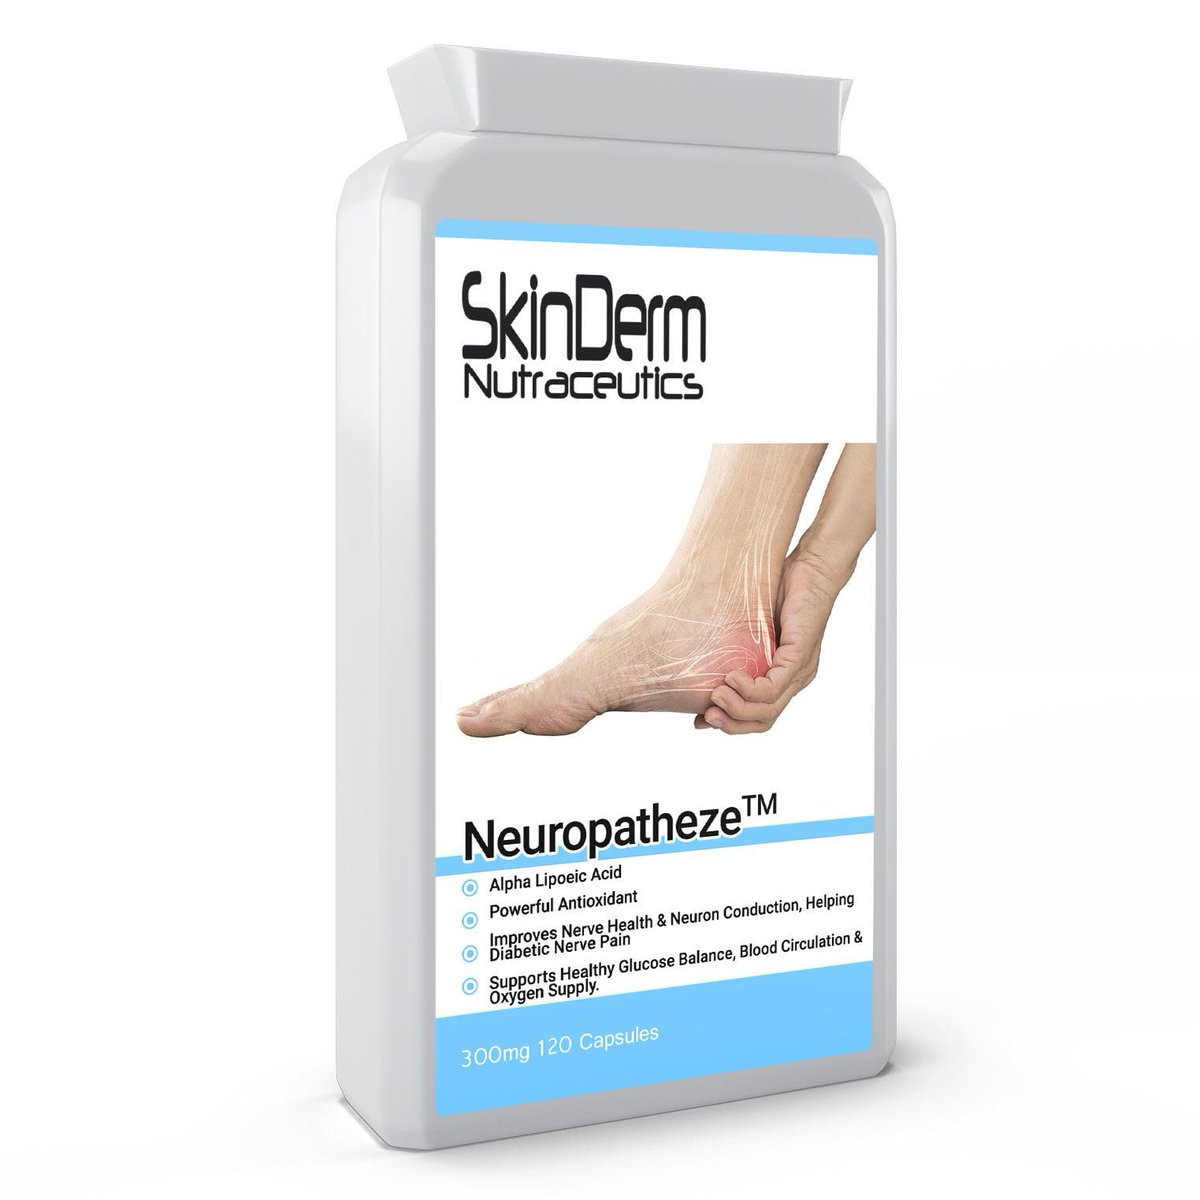 #SkinDerm #Neuropatheze is a top seller due to its extremely positive feedback. It contains #AlphaLipoicAcid in an easy to take #Dailysupplement.help support to #healthynervoussystem function& #bloodsugar balance. Shop now. skinderm.co.uk OR amzn.to/2zP5s0N